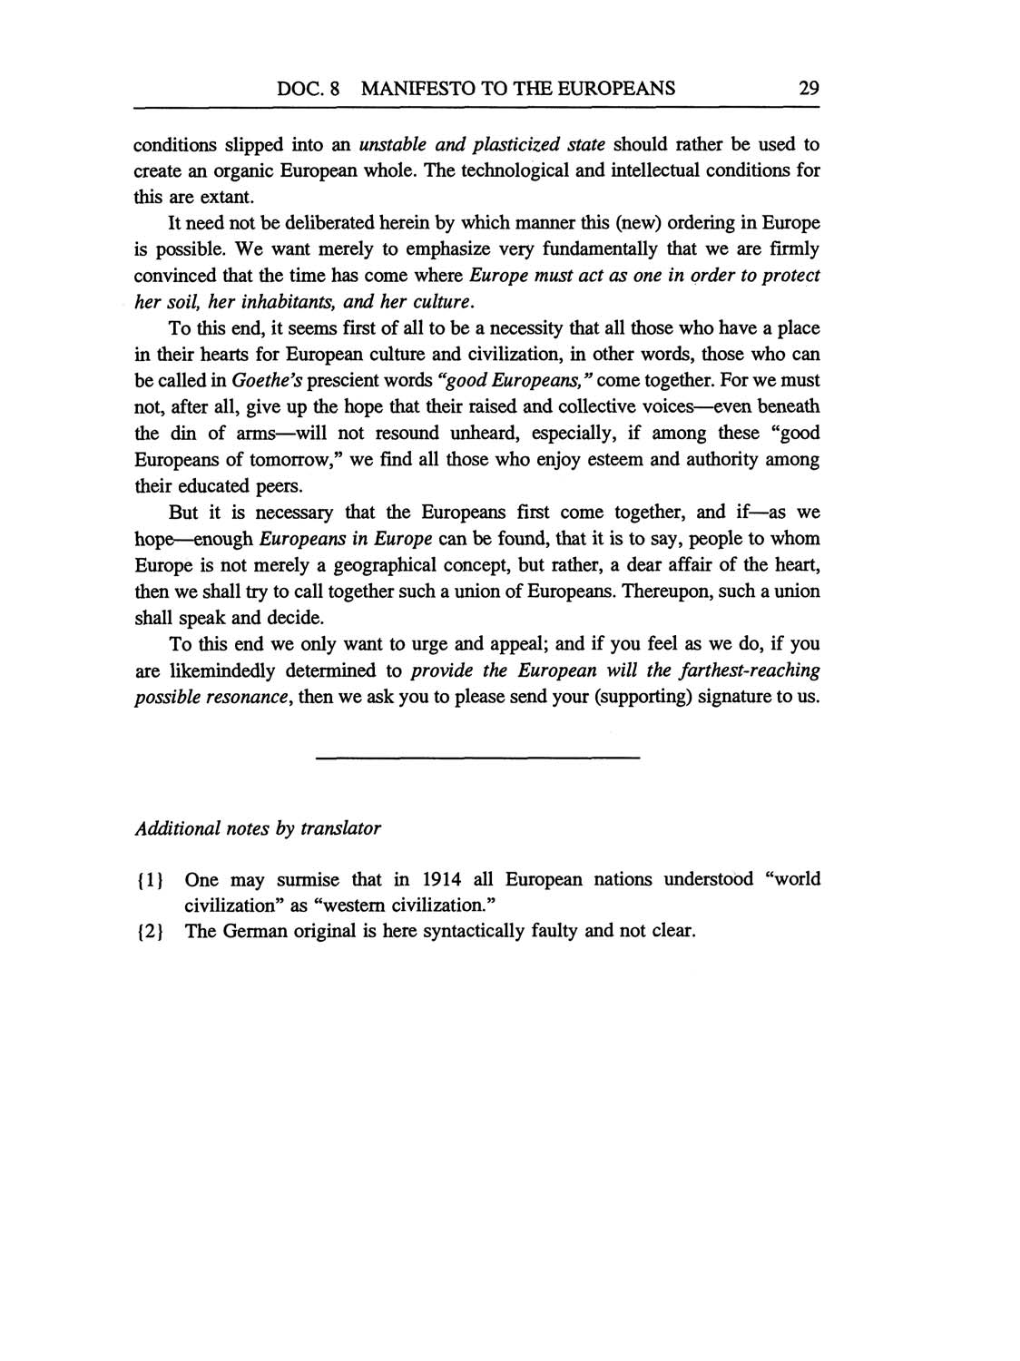 Volume 6: The Berlin Years: Writings, 1914-1917 (English translation supplement) page 29